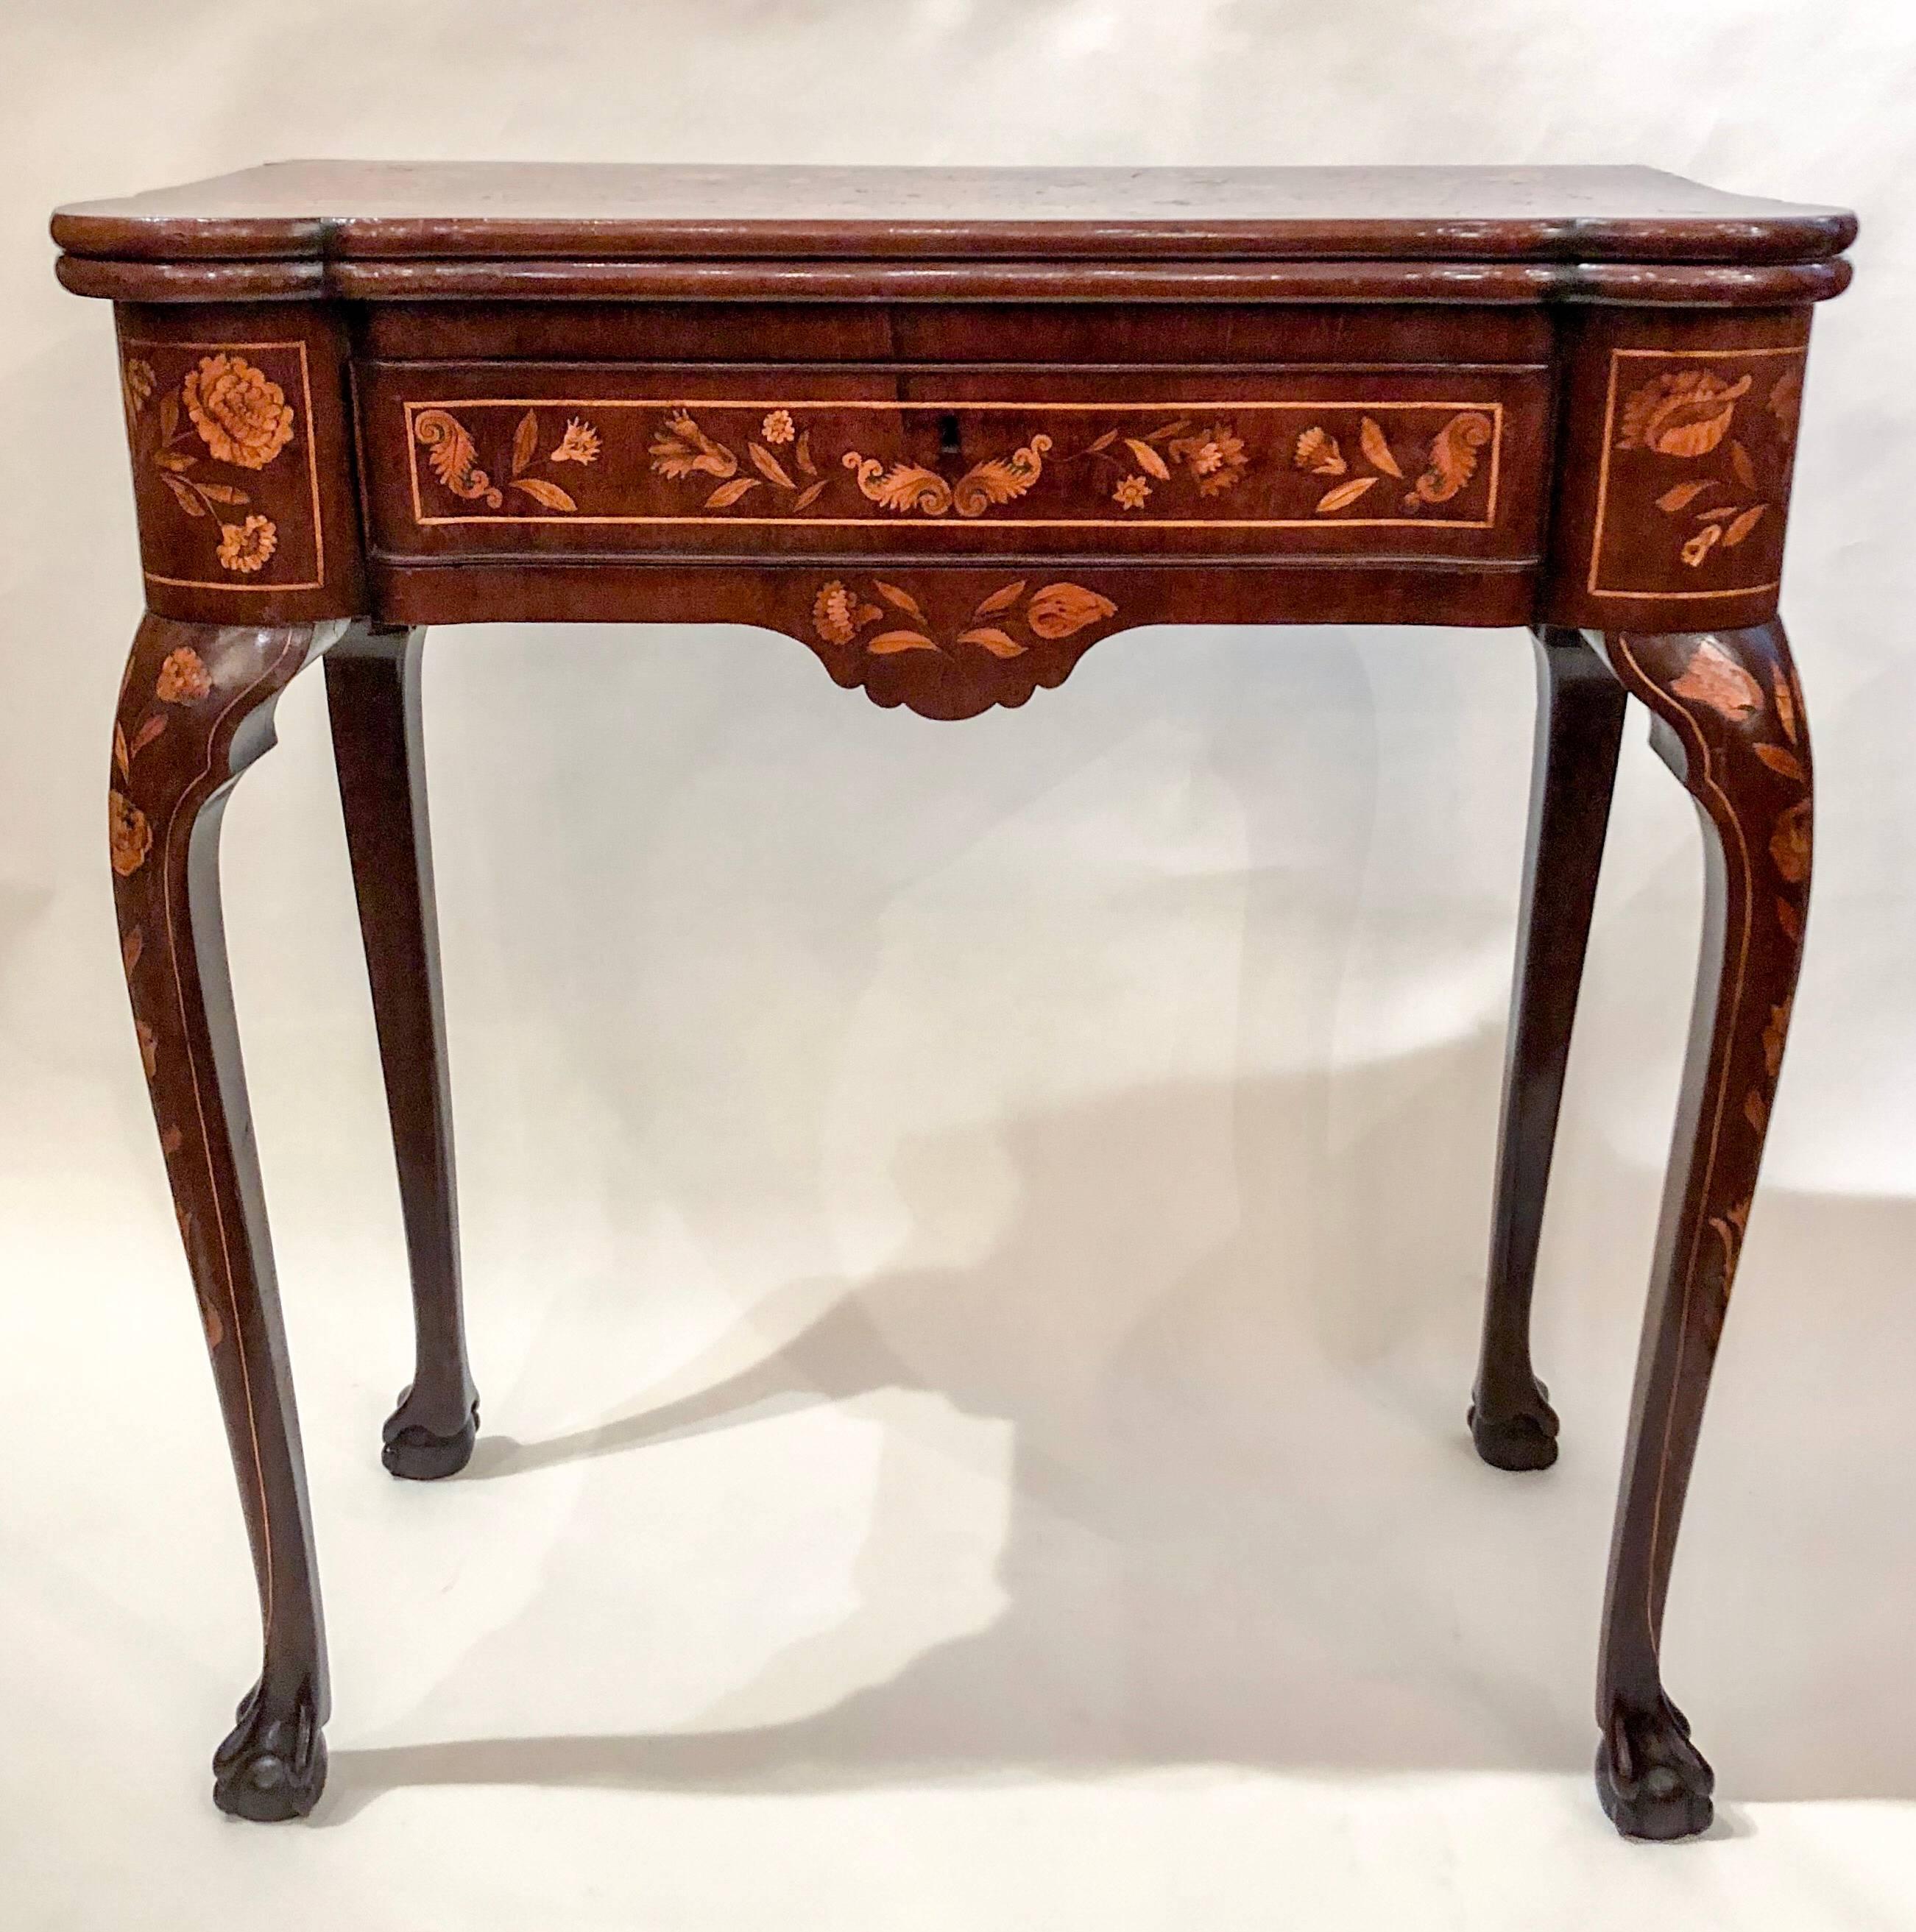 Antique 18th century Dutch marquetry console card table. A very handsome piece of furniture. Table is 14